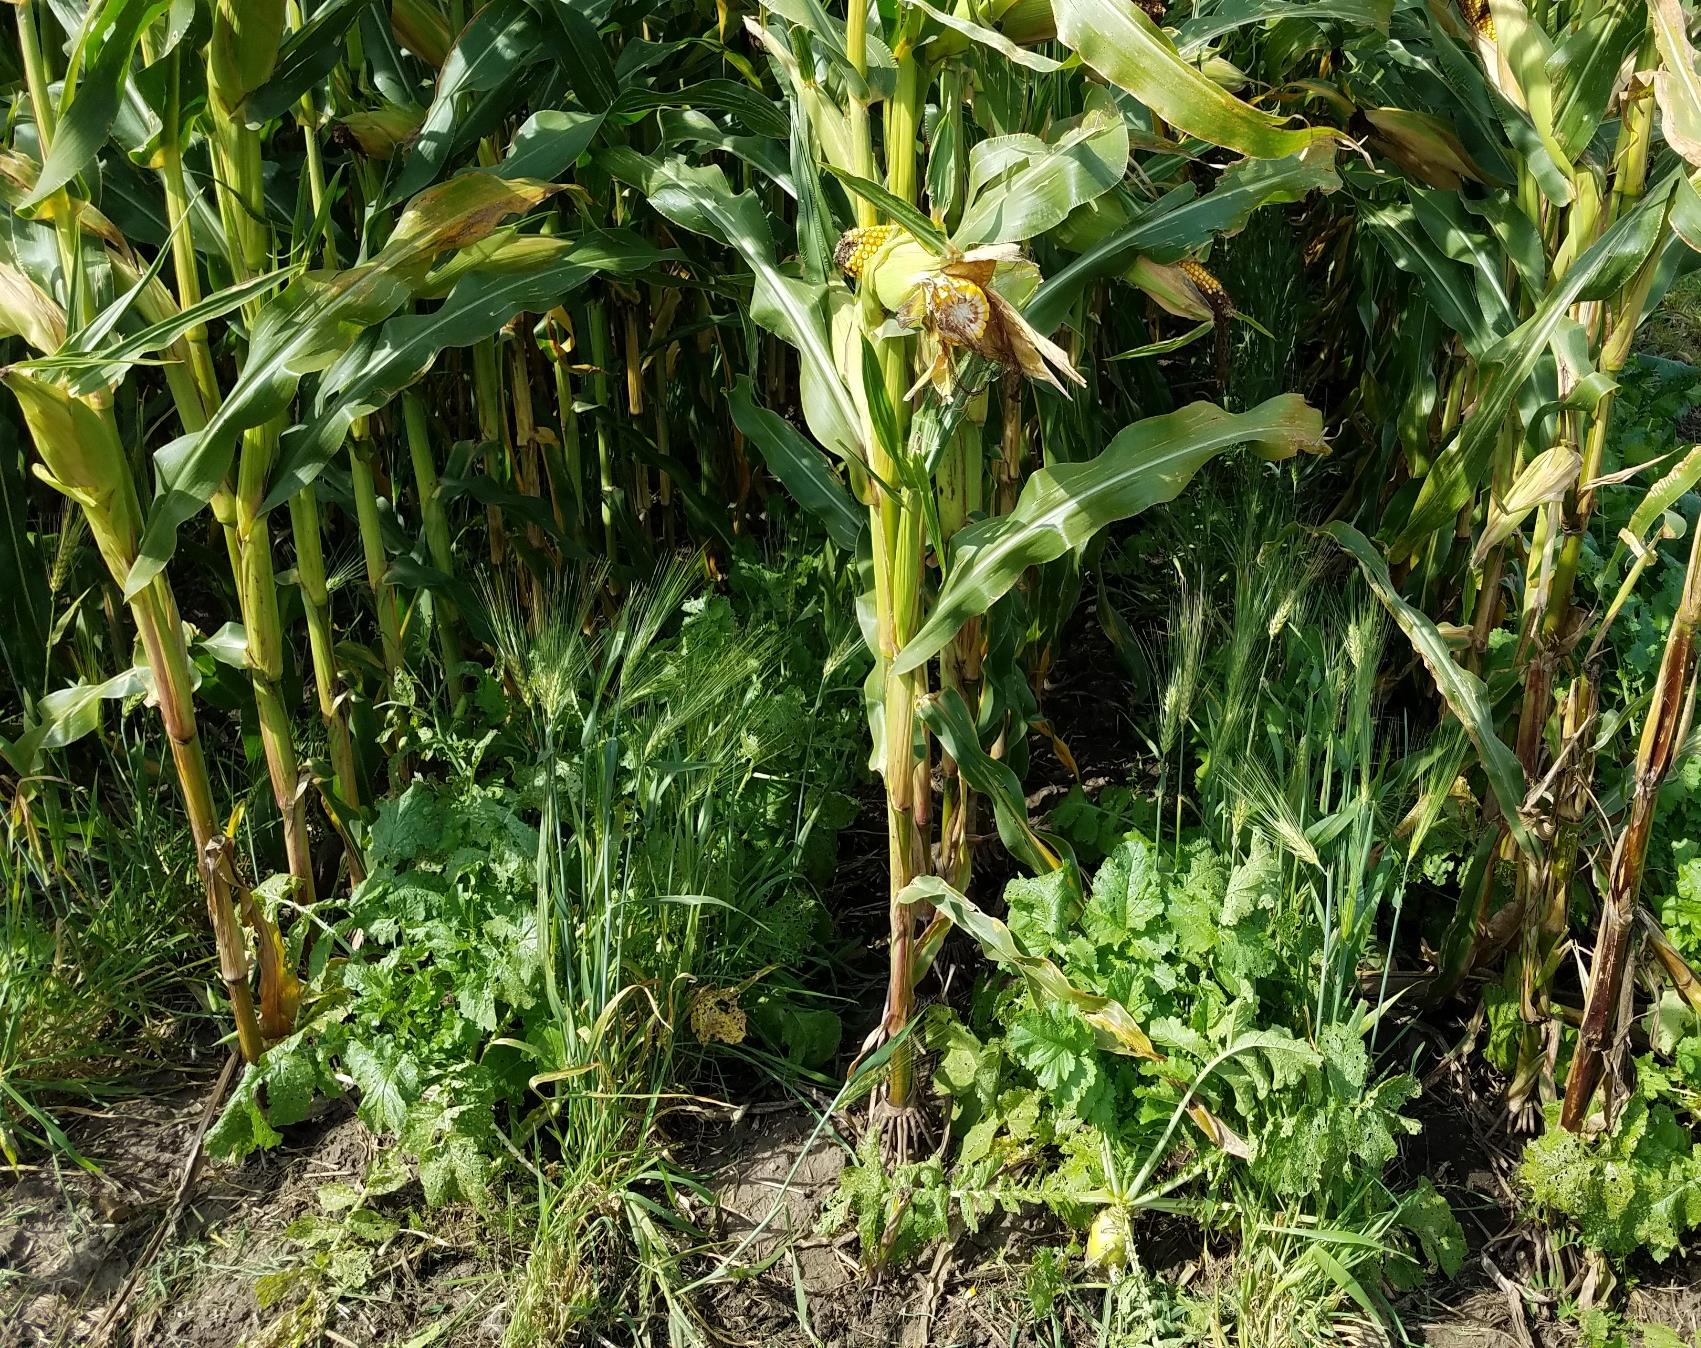 Cover crops are intercropped into standing corn at the NDSU Carrington Research Extension Center. (NDSU photo)